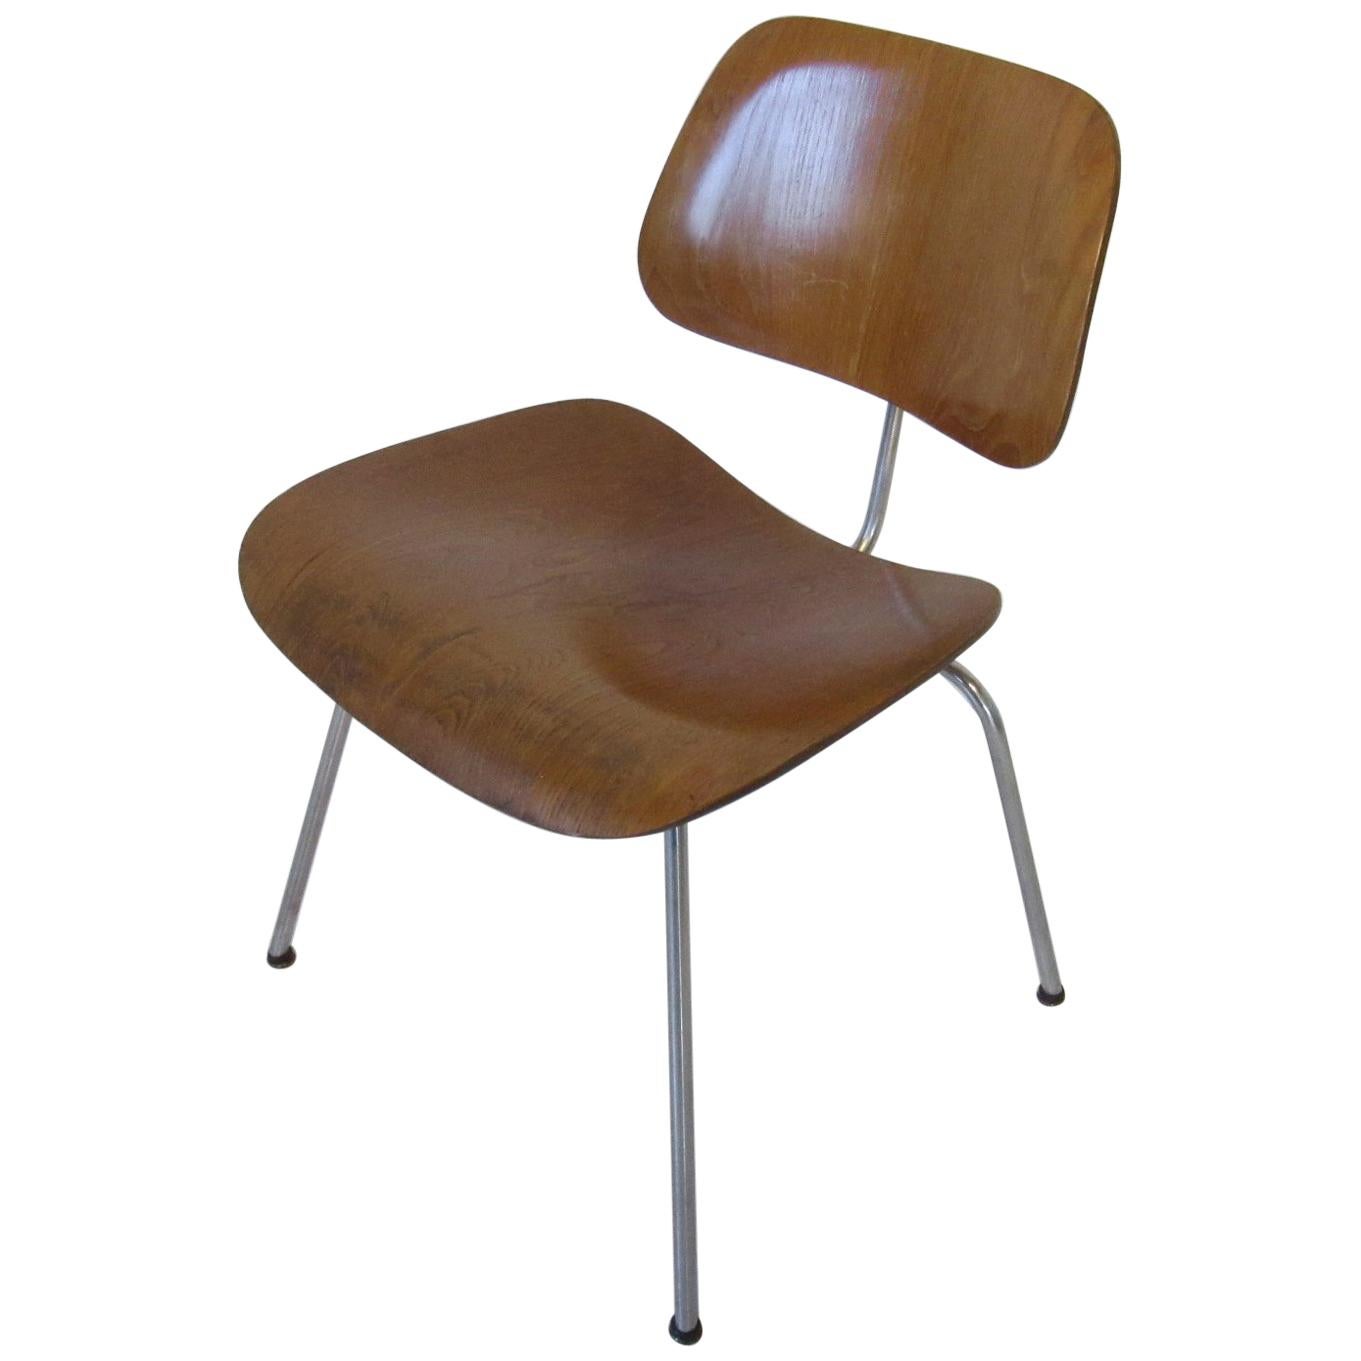 Early Eames DCM Chair by Herman Miller